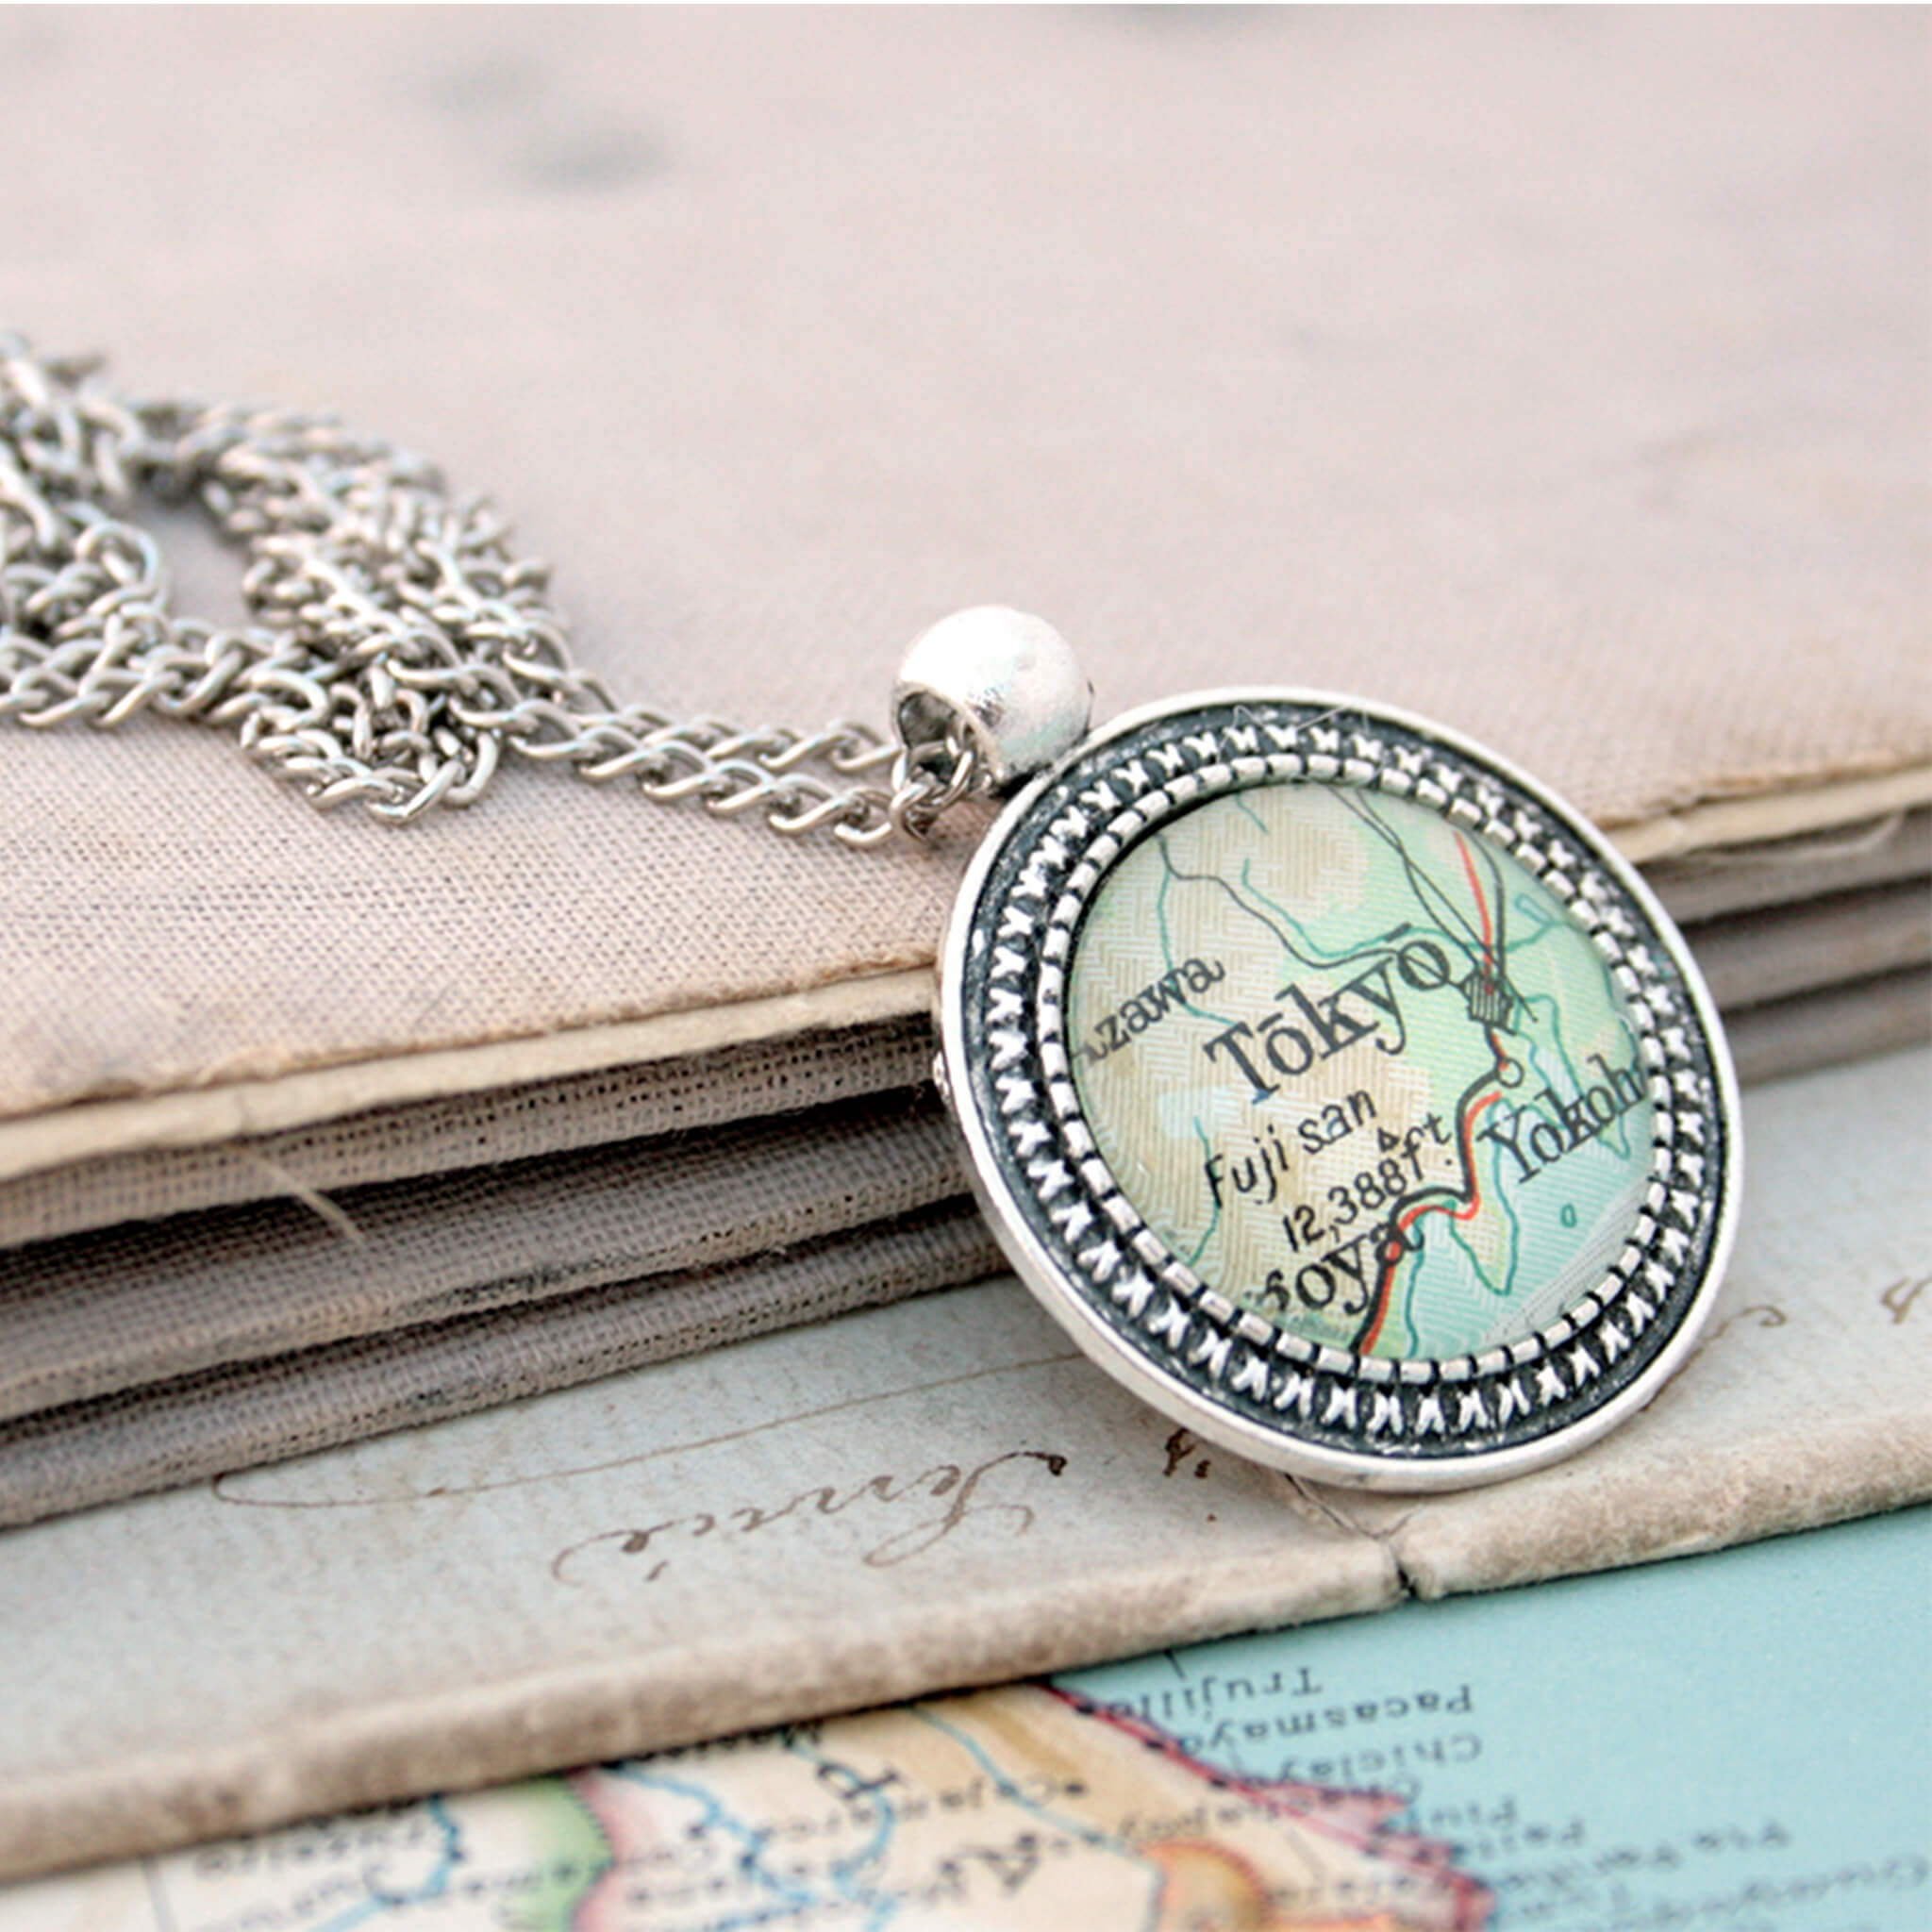 Silver coloured pendant necklace with map of Tokyo leaning on the book